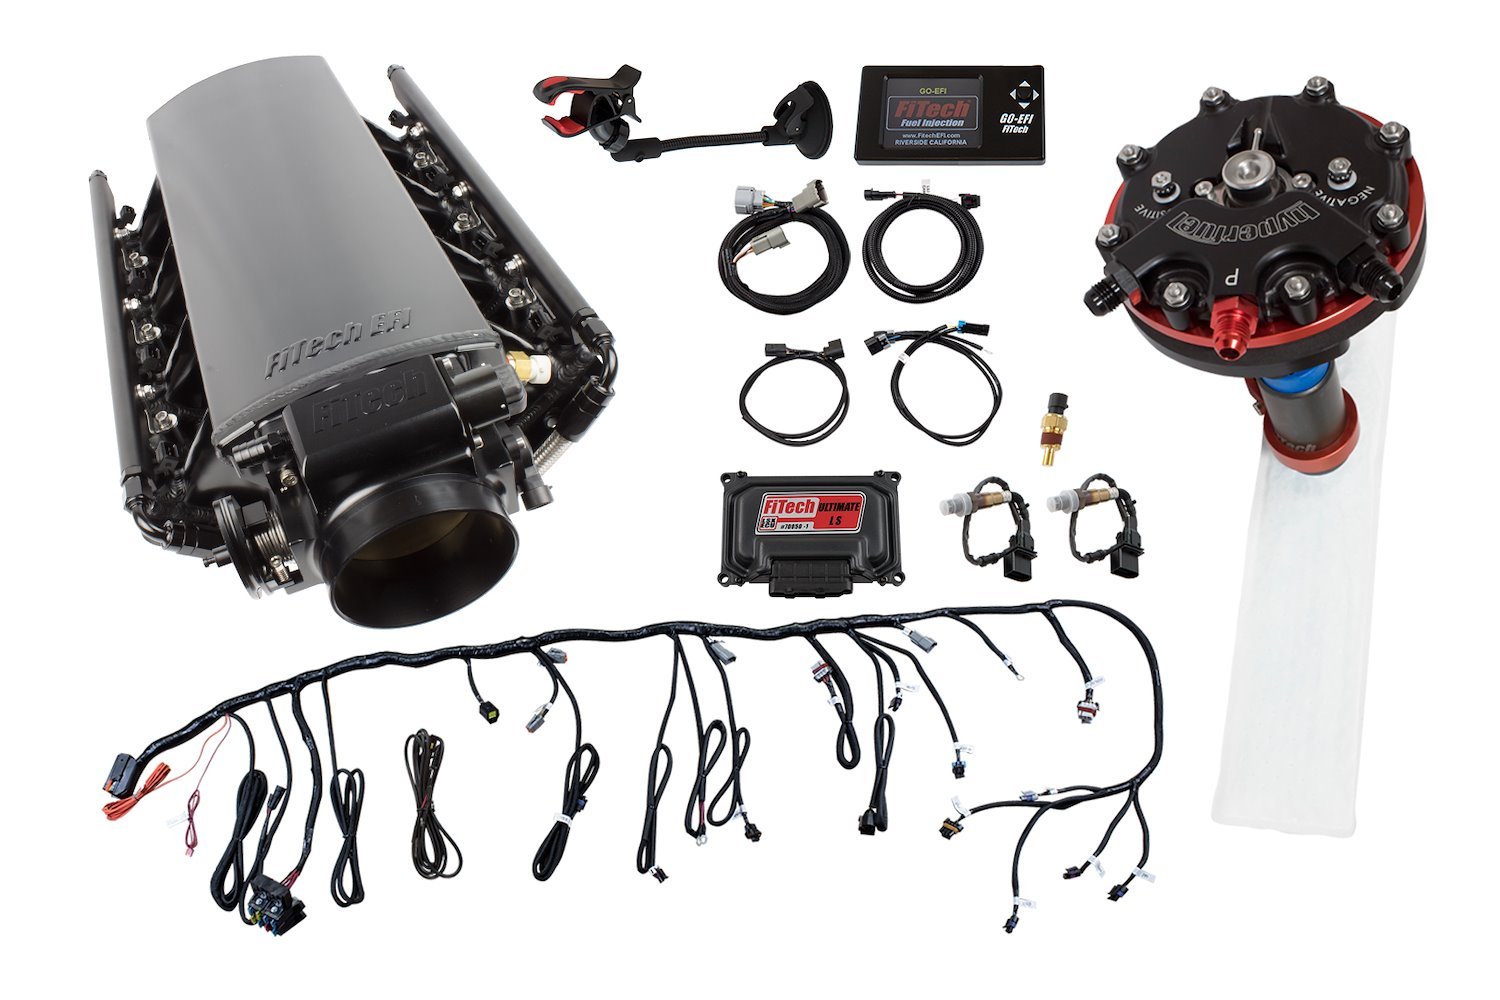 Ultimate LS EFI Induction System LS1/LS2/LS6 750 HP with Transmission Control and Hy-Fuel Single Pump Regulated In-Tank Retrofit